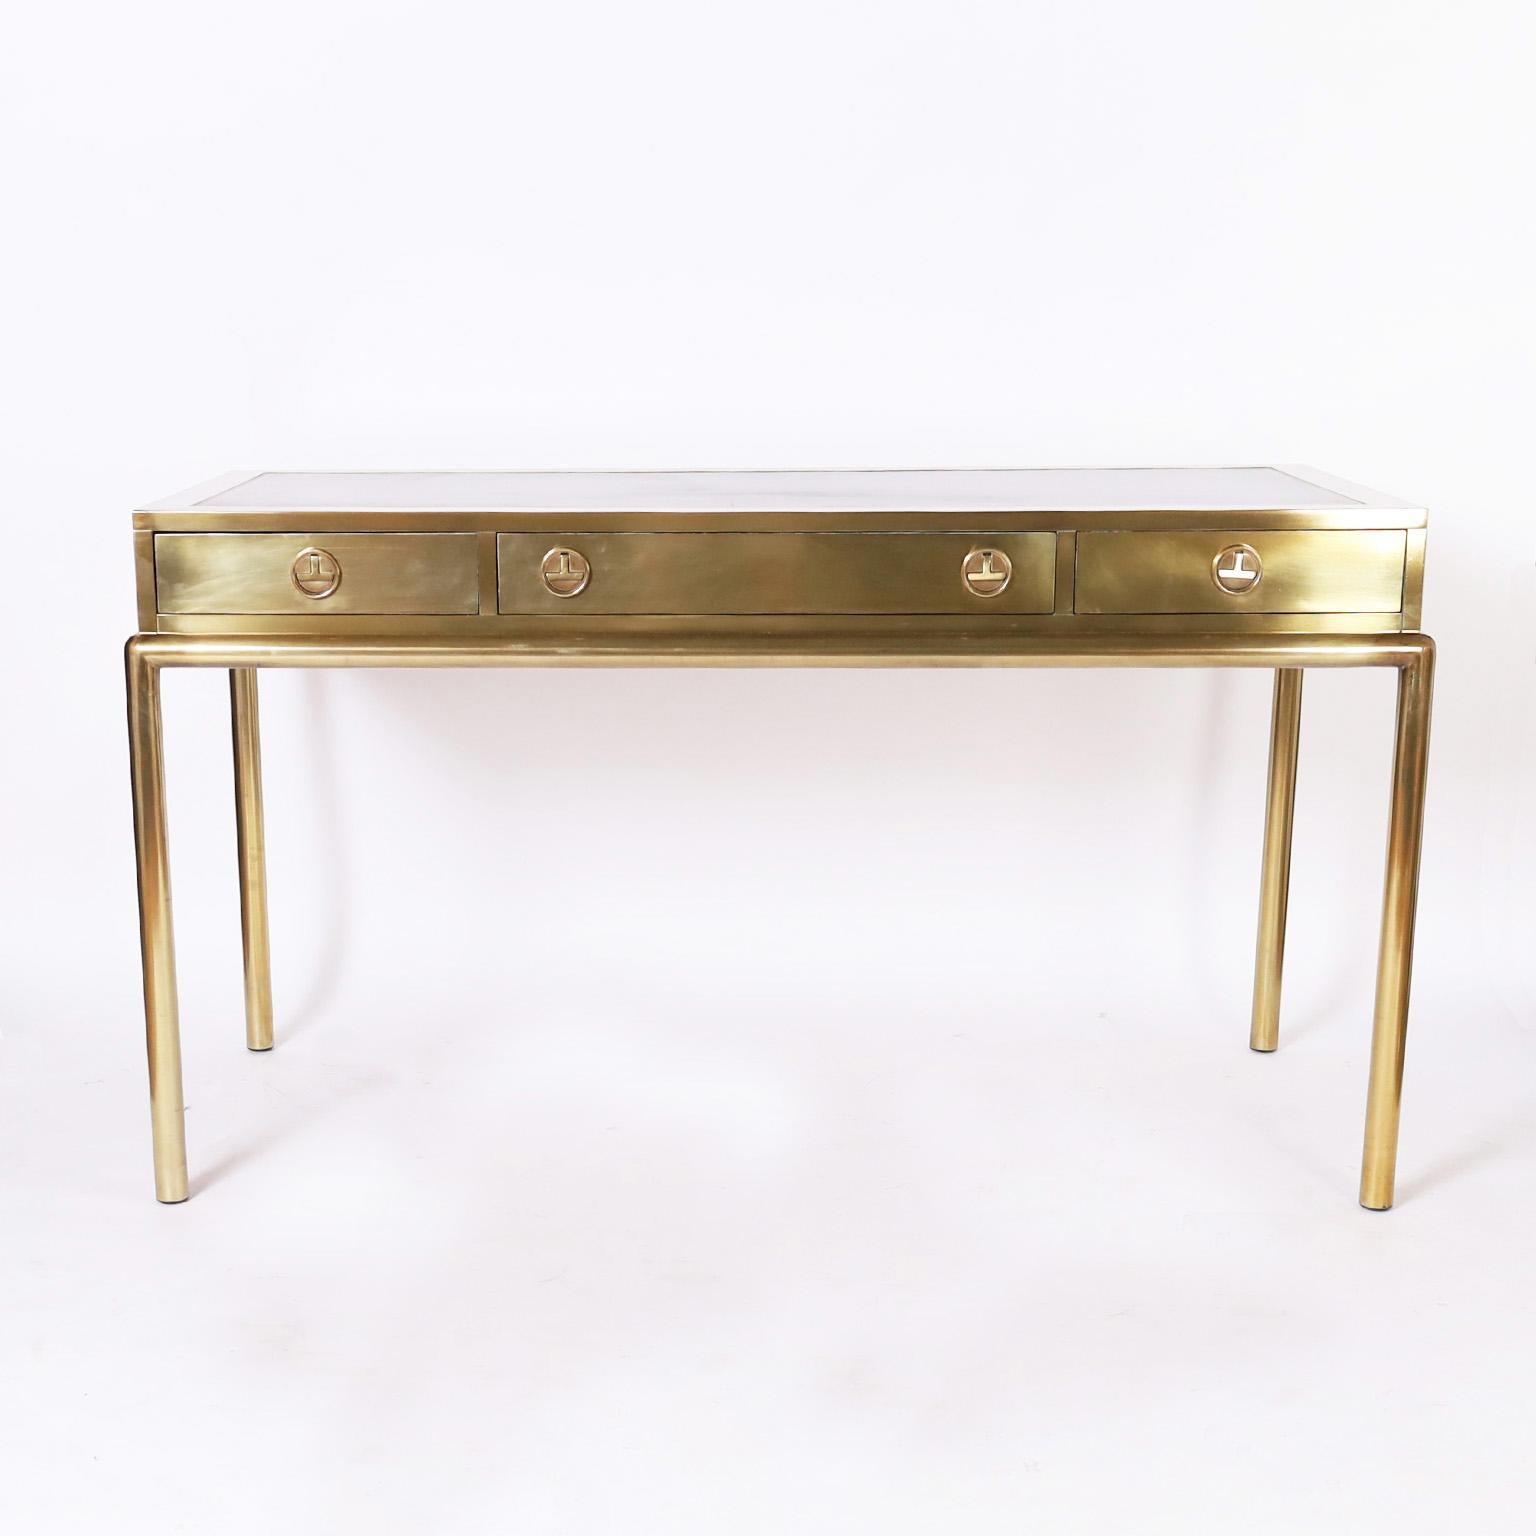 Now a modern design classic, a signed Mastercraft brass desk having a sleek no nonsense form, tooled brown leather top, a case with three drawers having stylized campaign hardware and four elegant tubular legs.